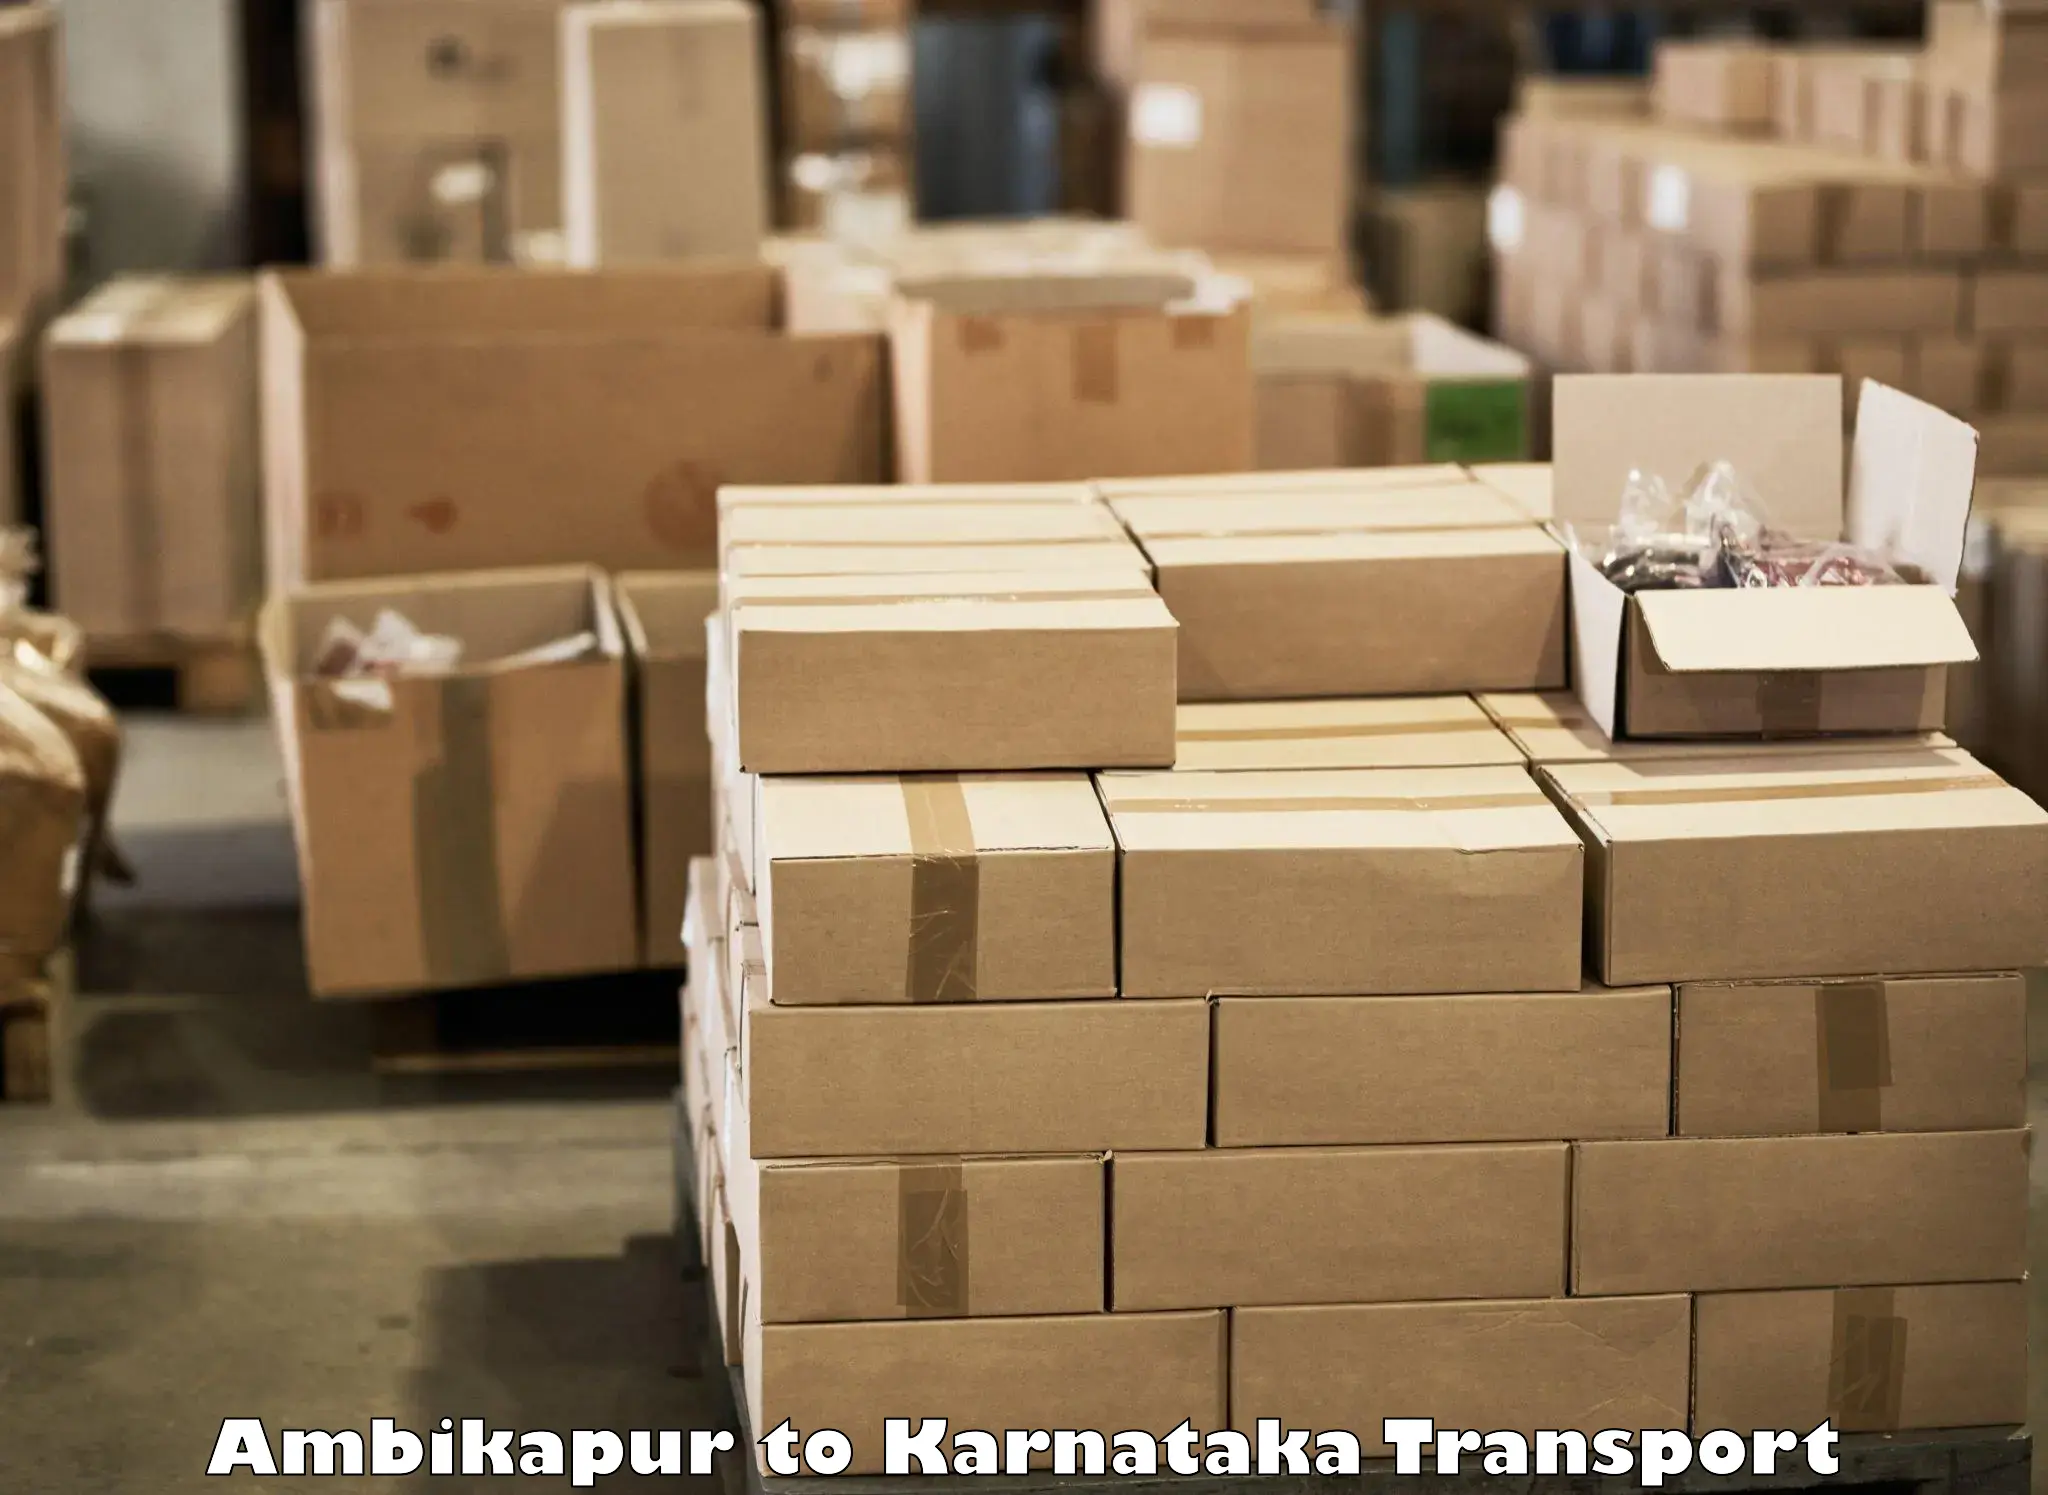 Commercial transport service Ambikapur to Bailhongal